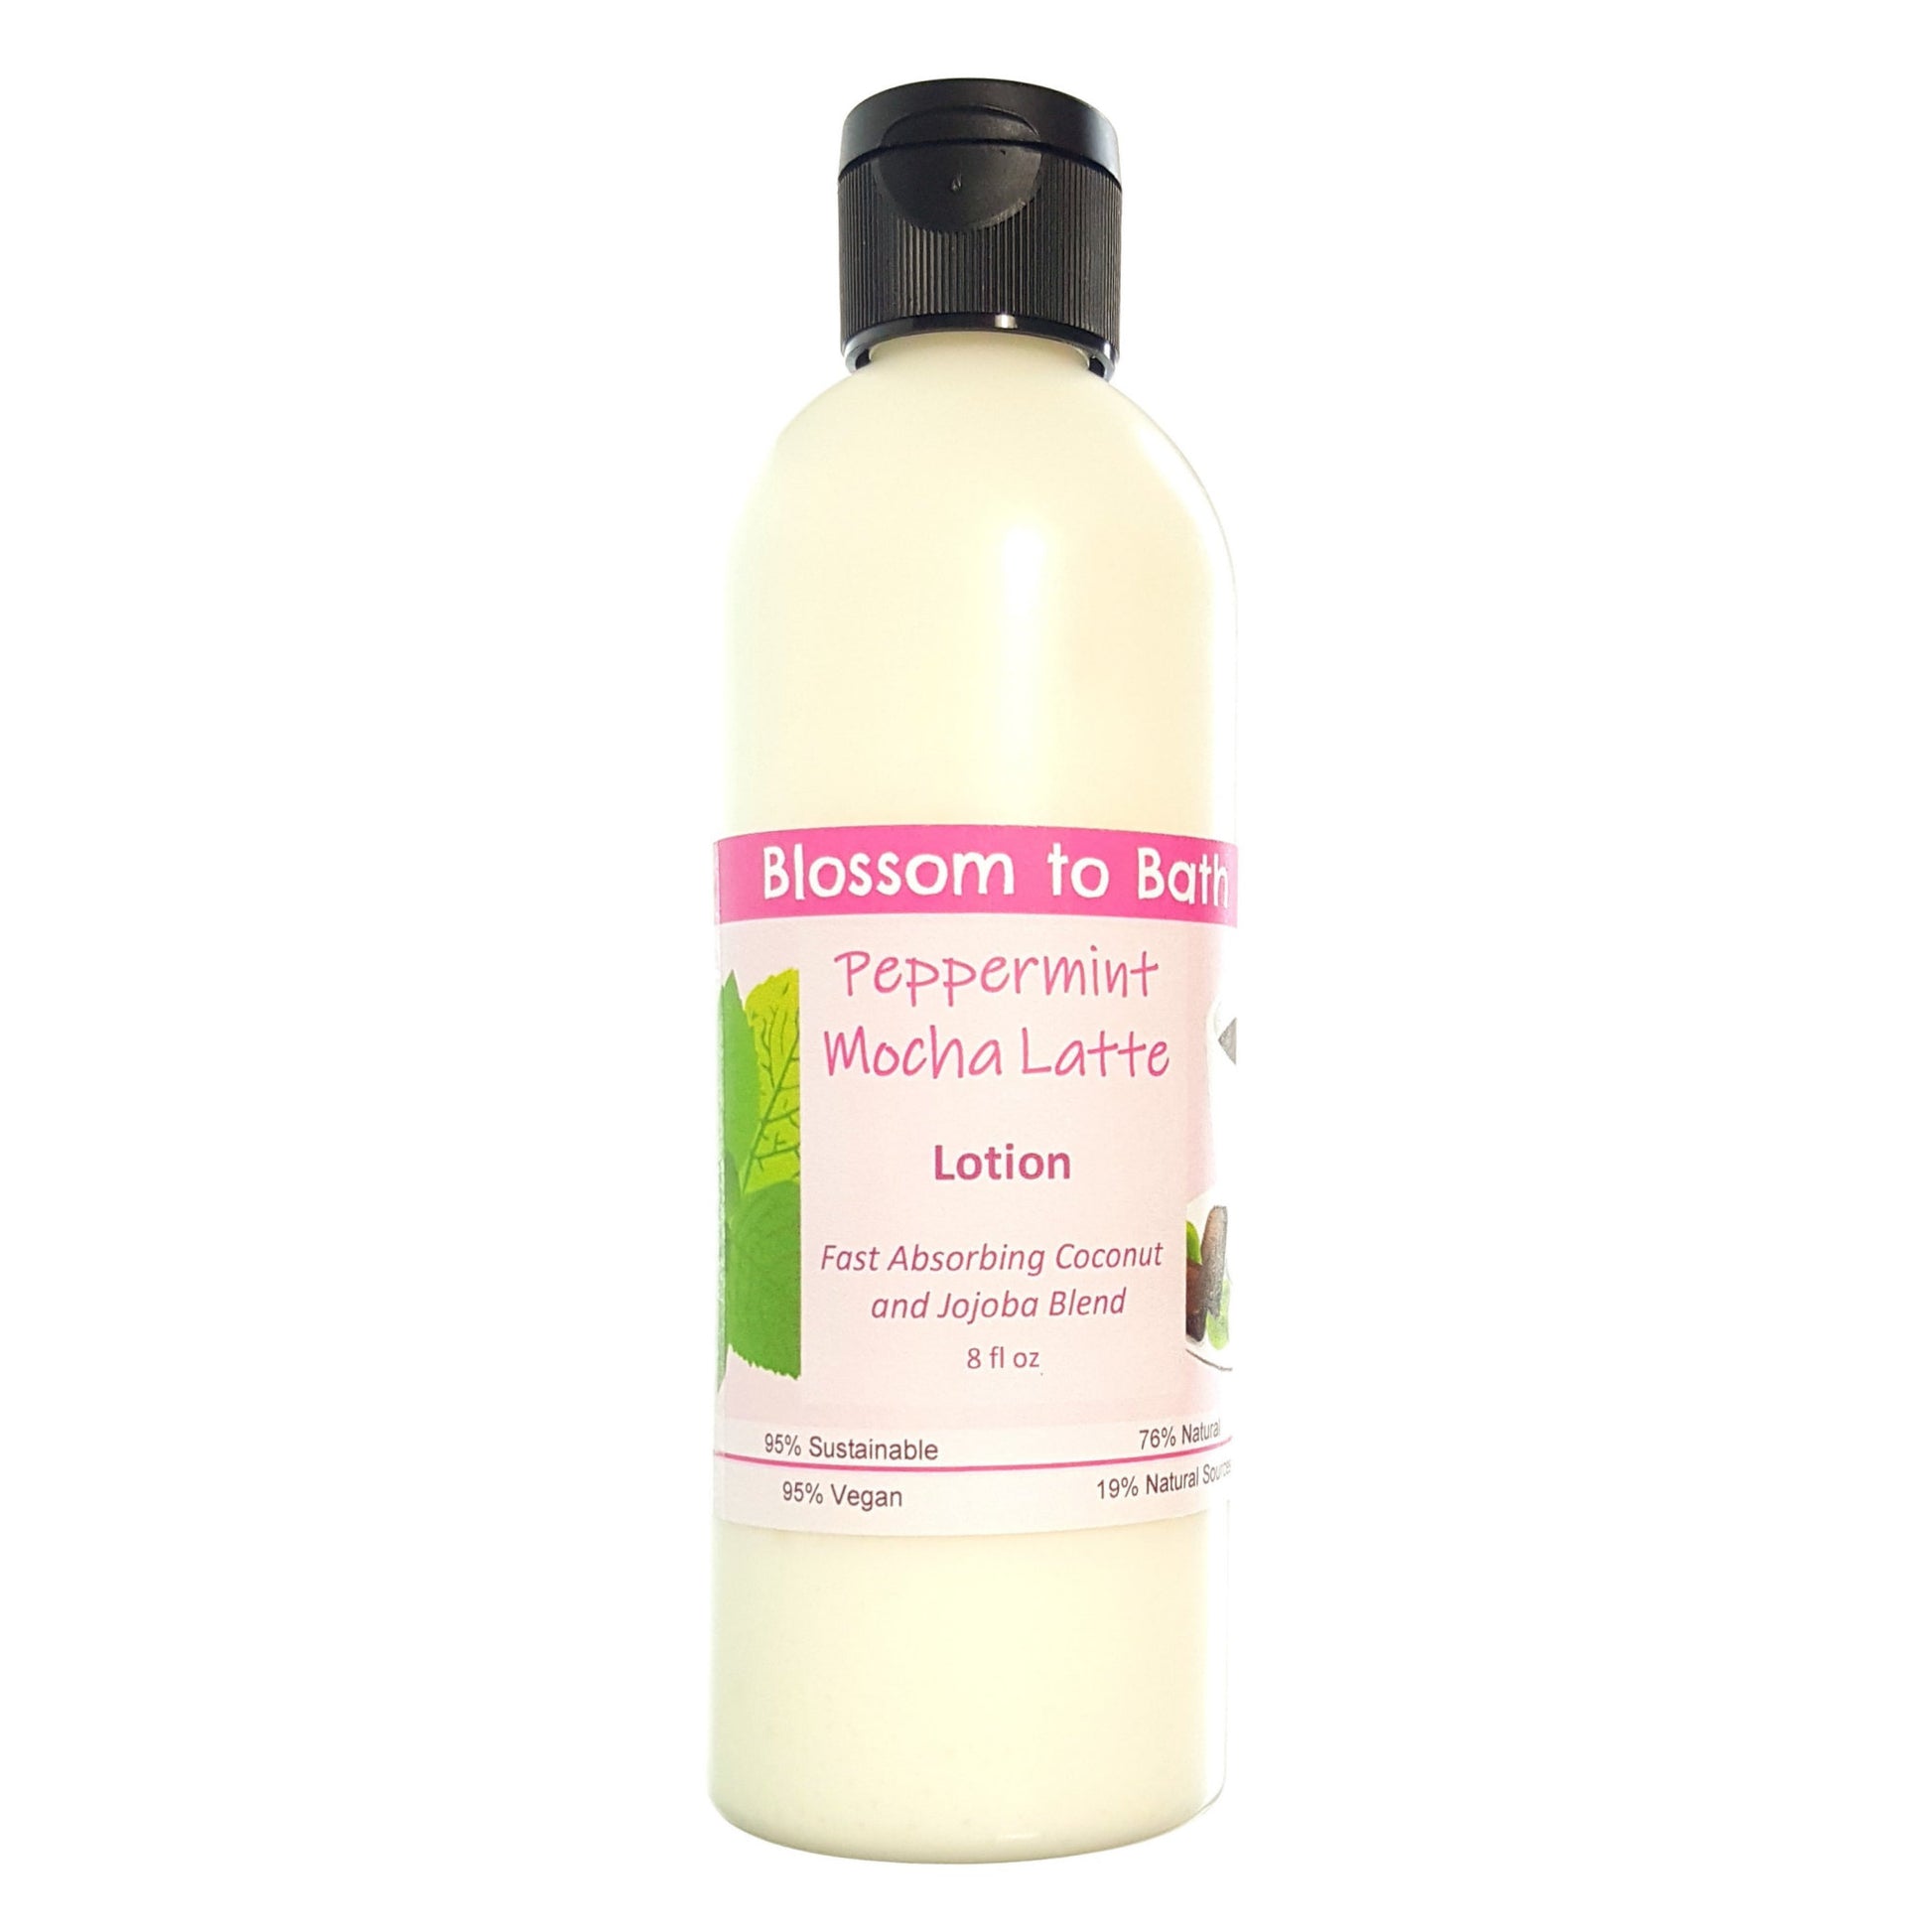 Buy Blossom to Bath Peppermint Mocha Latte Lotion from Flowersong Soap Studio.  Daily moisture  that soaks in quickly made with organic oils and butters that soften and smooth the skin  A confectionary blend of fresh mint, rich fudge, and coffee.